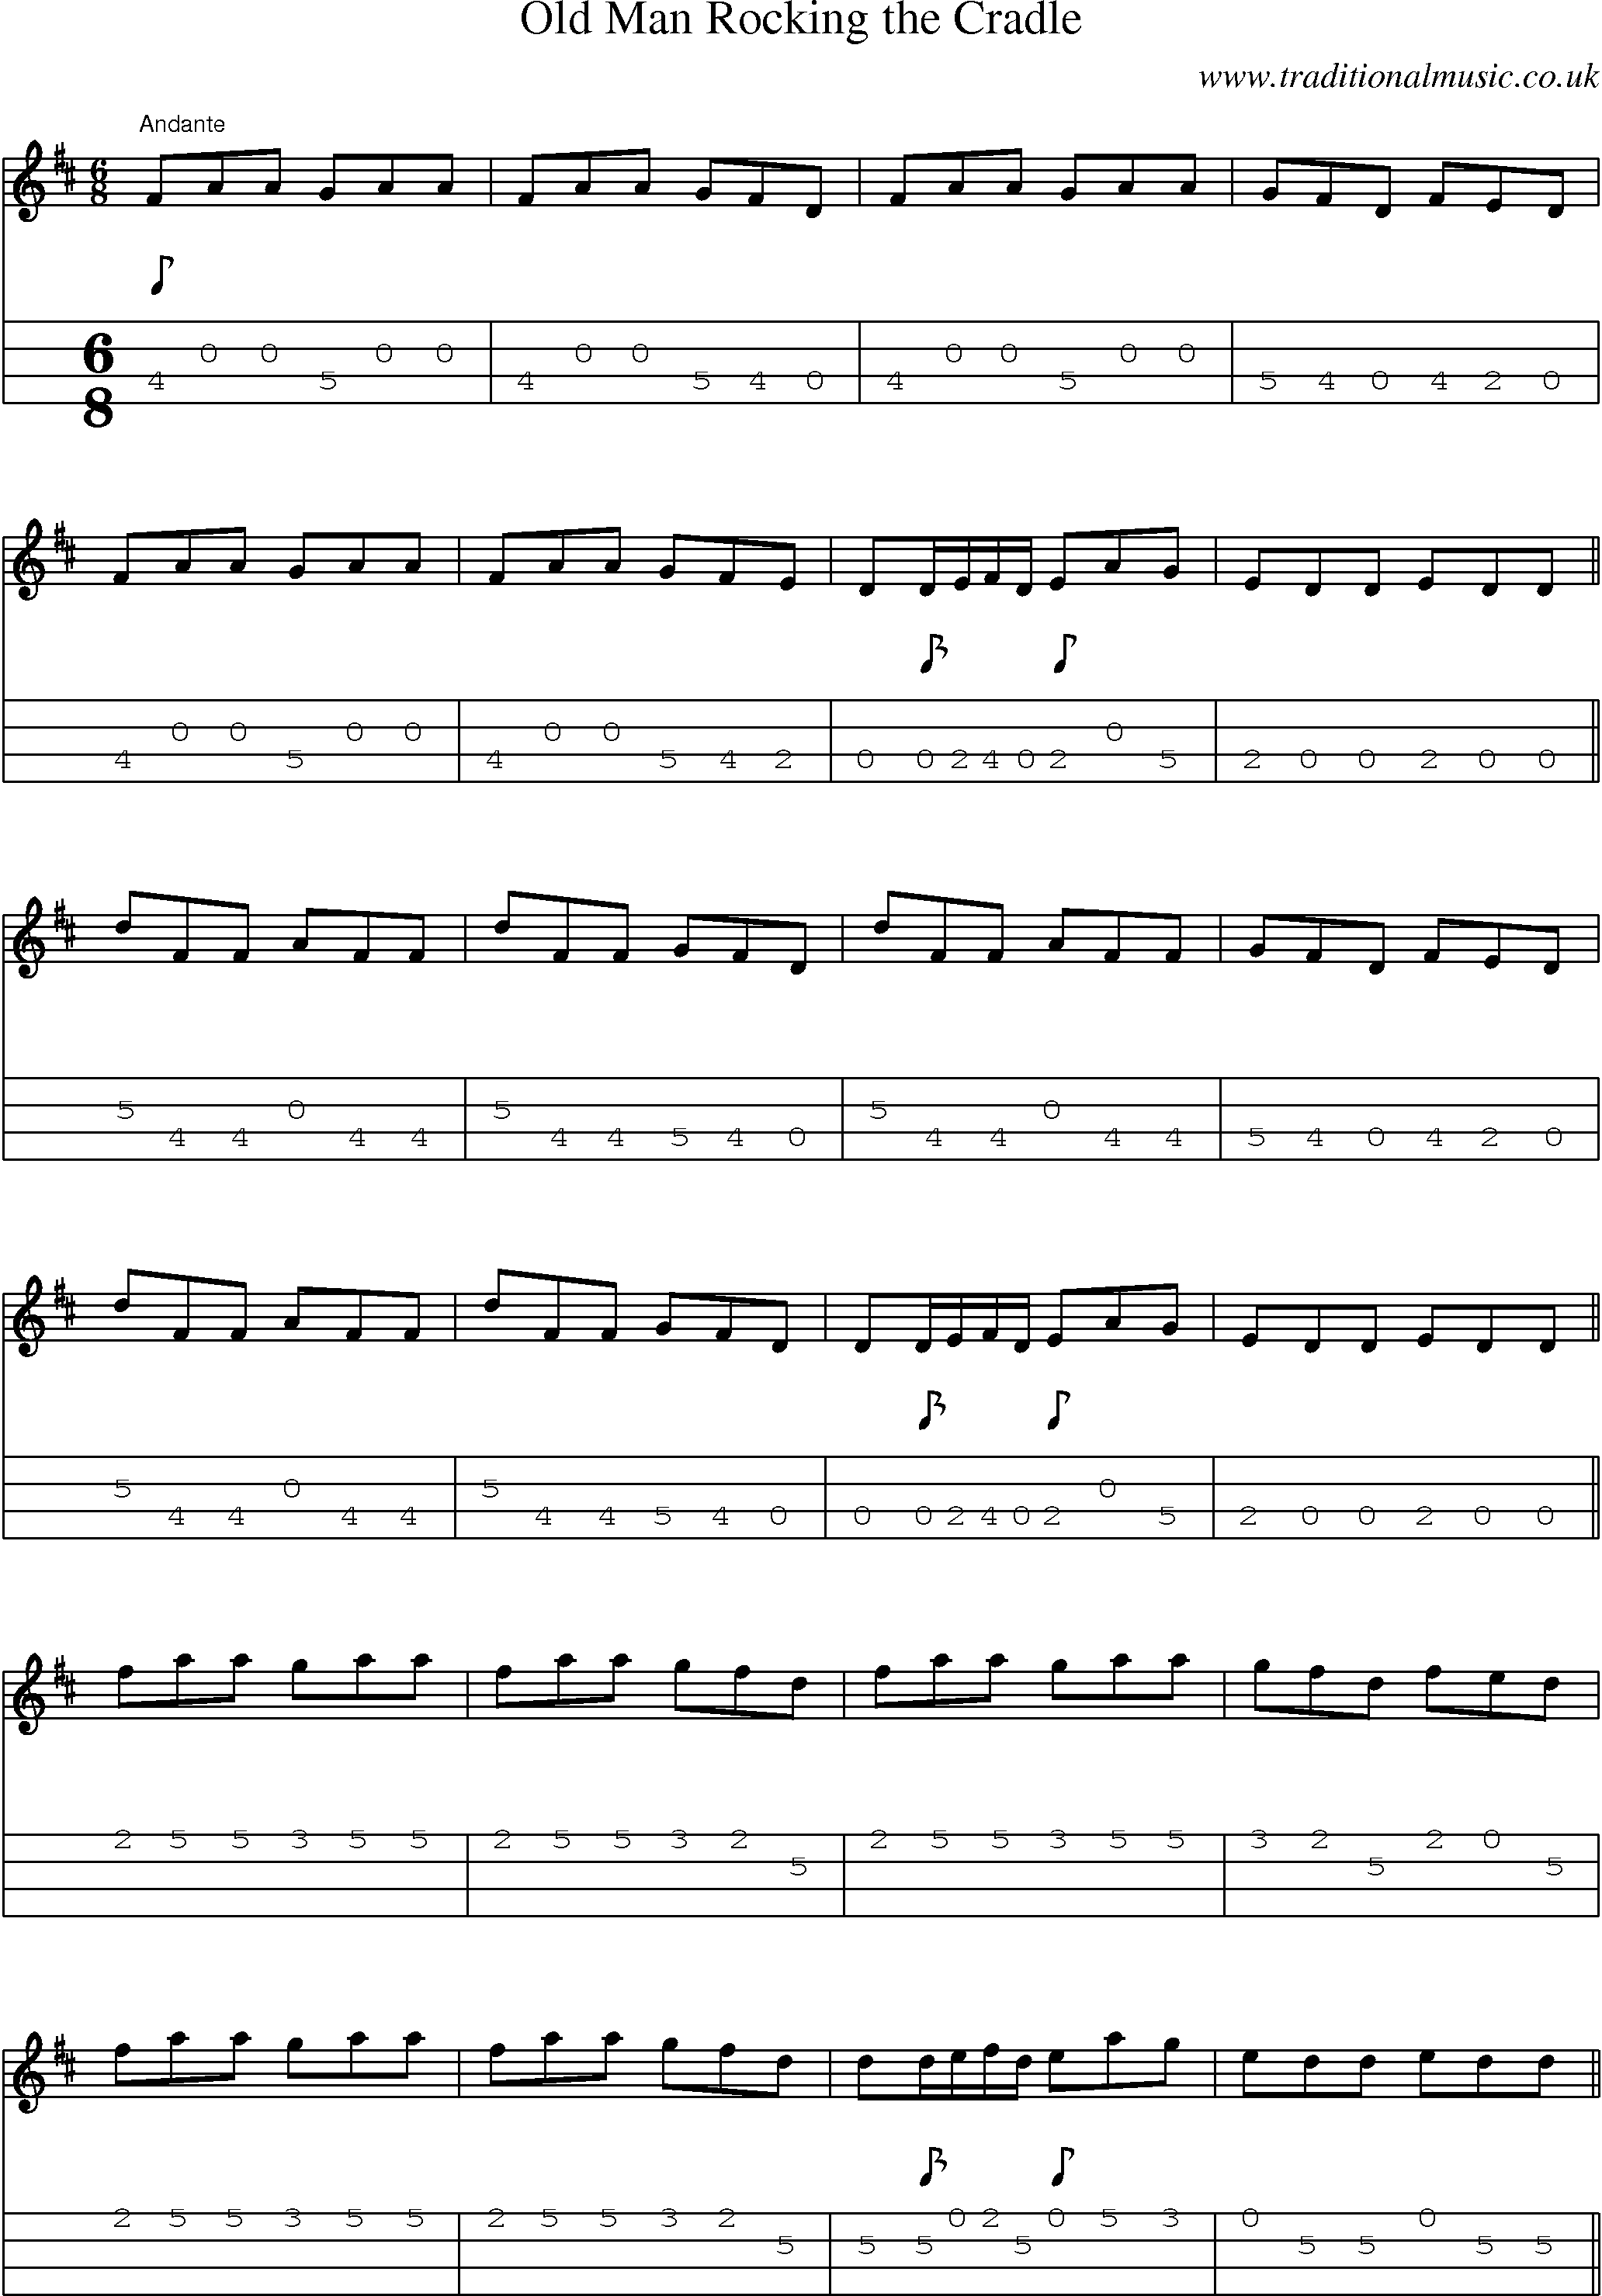 Music Score and Mandolin Tabs for Old Man Rocking Cradle